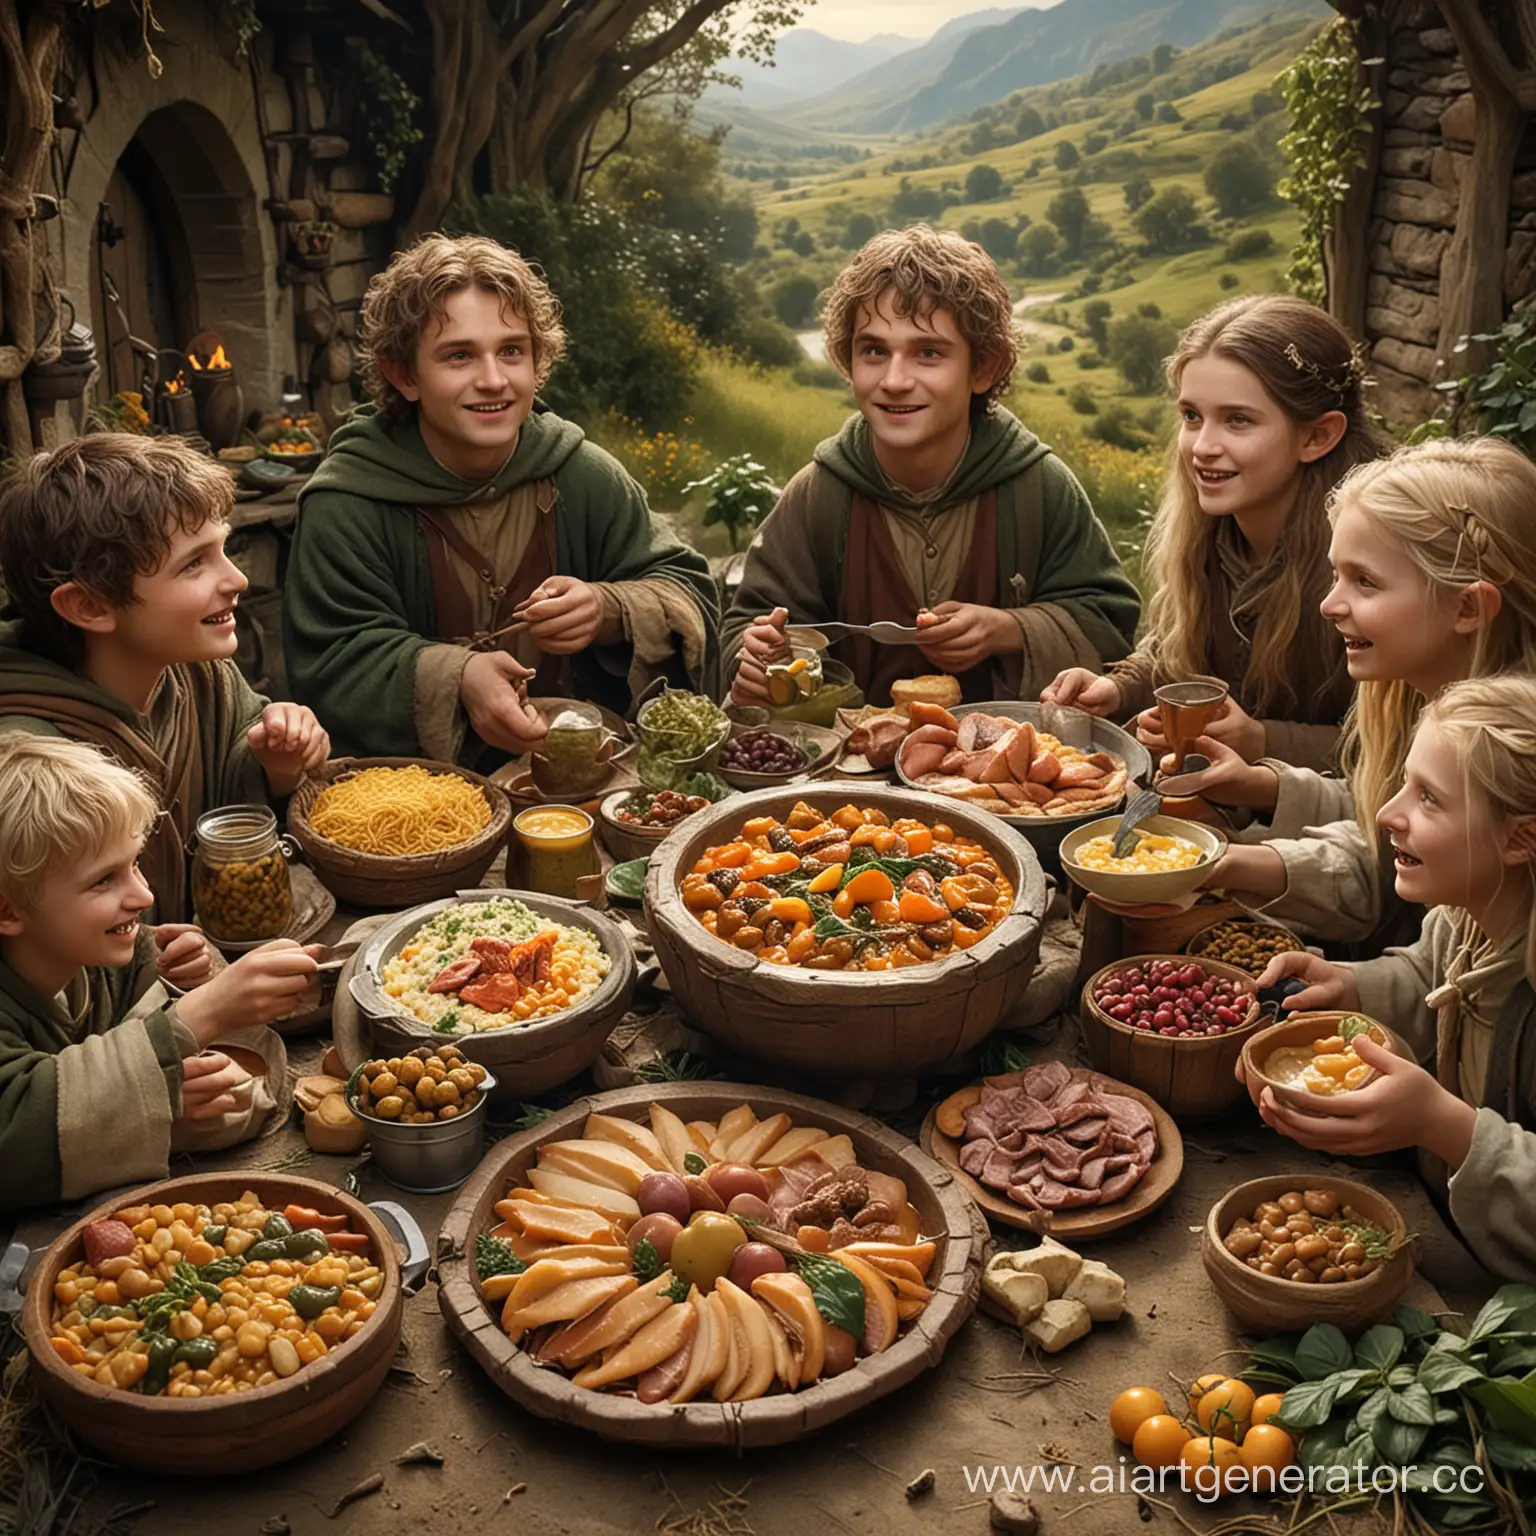 Warrior-Hobbits-Gathering-Provisions-Food-for-Strength